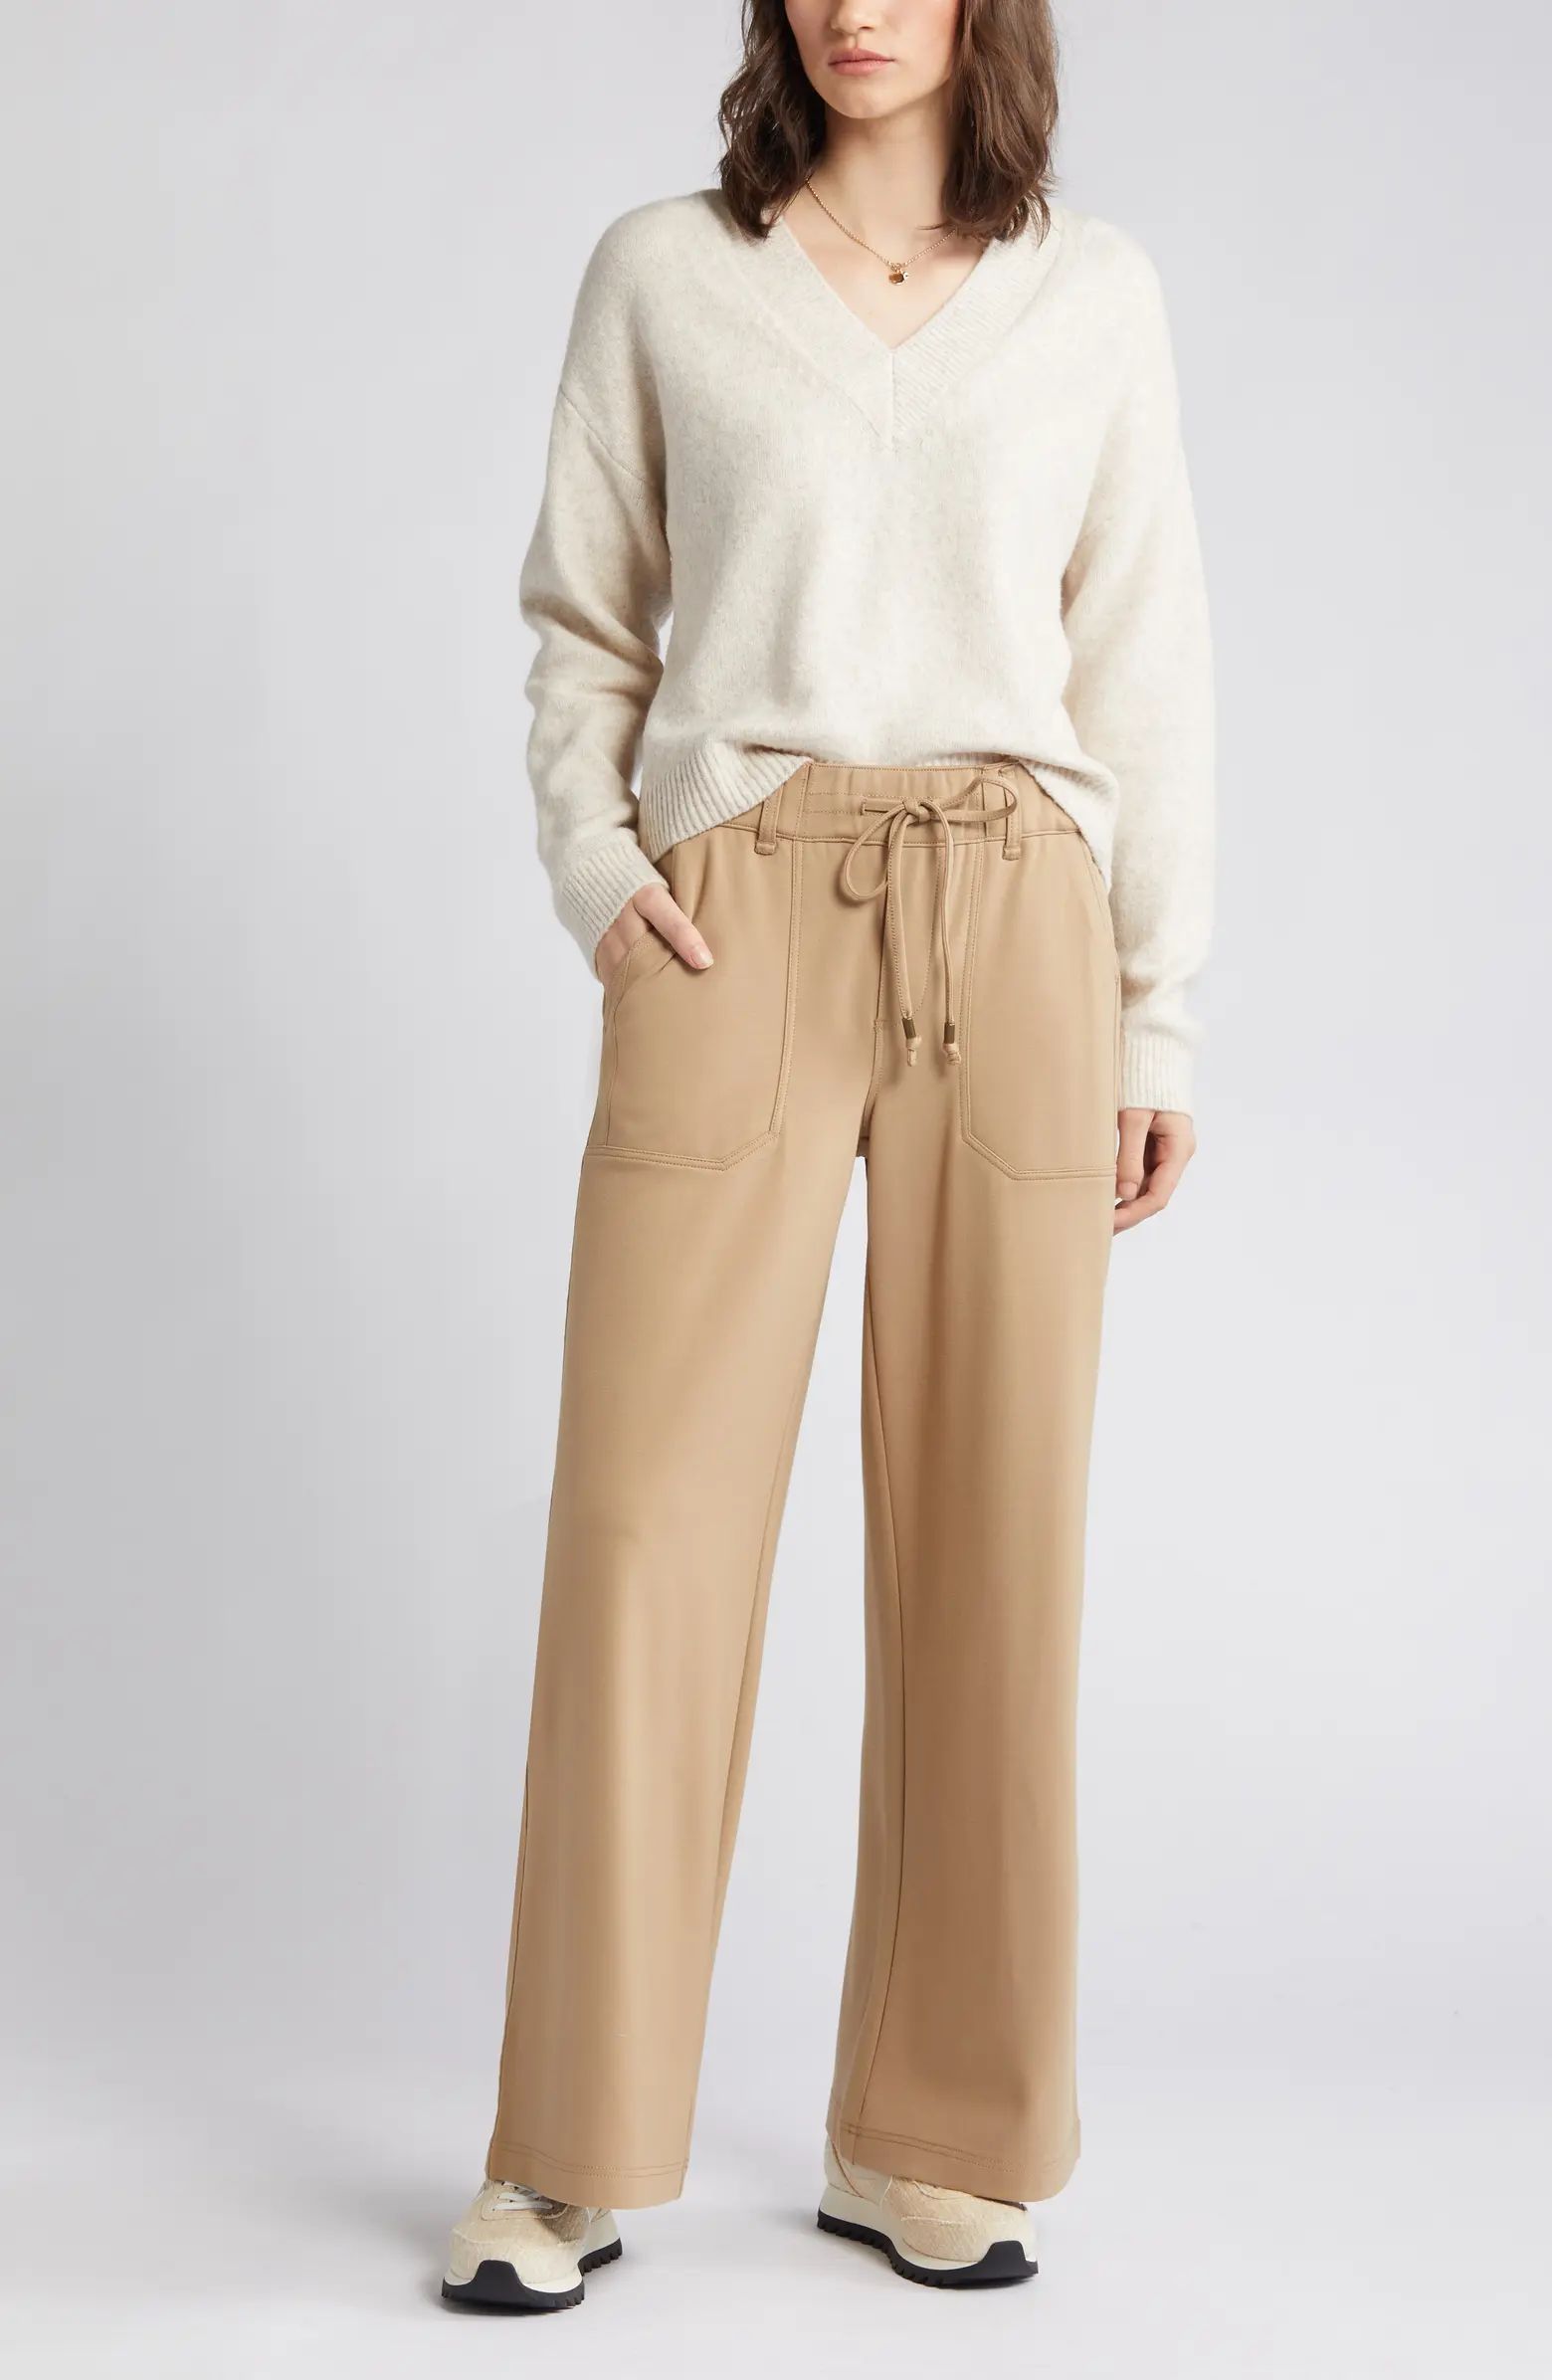 'Ab'Leisure Pull-On High Waist Wide Leg Knit Pants | Nordstrom